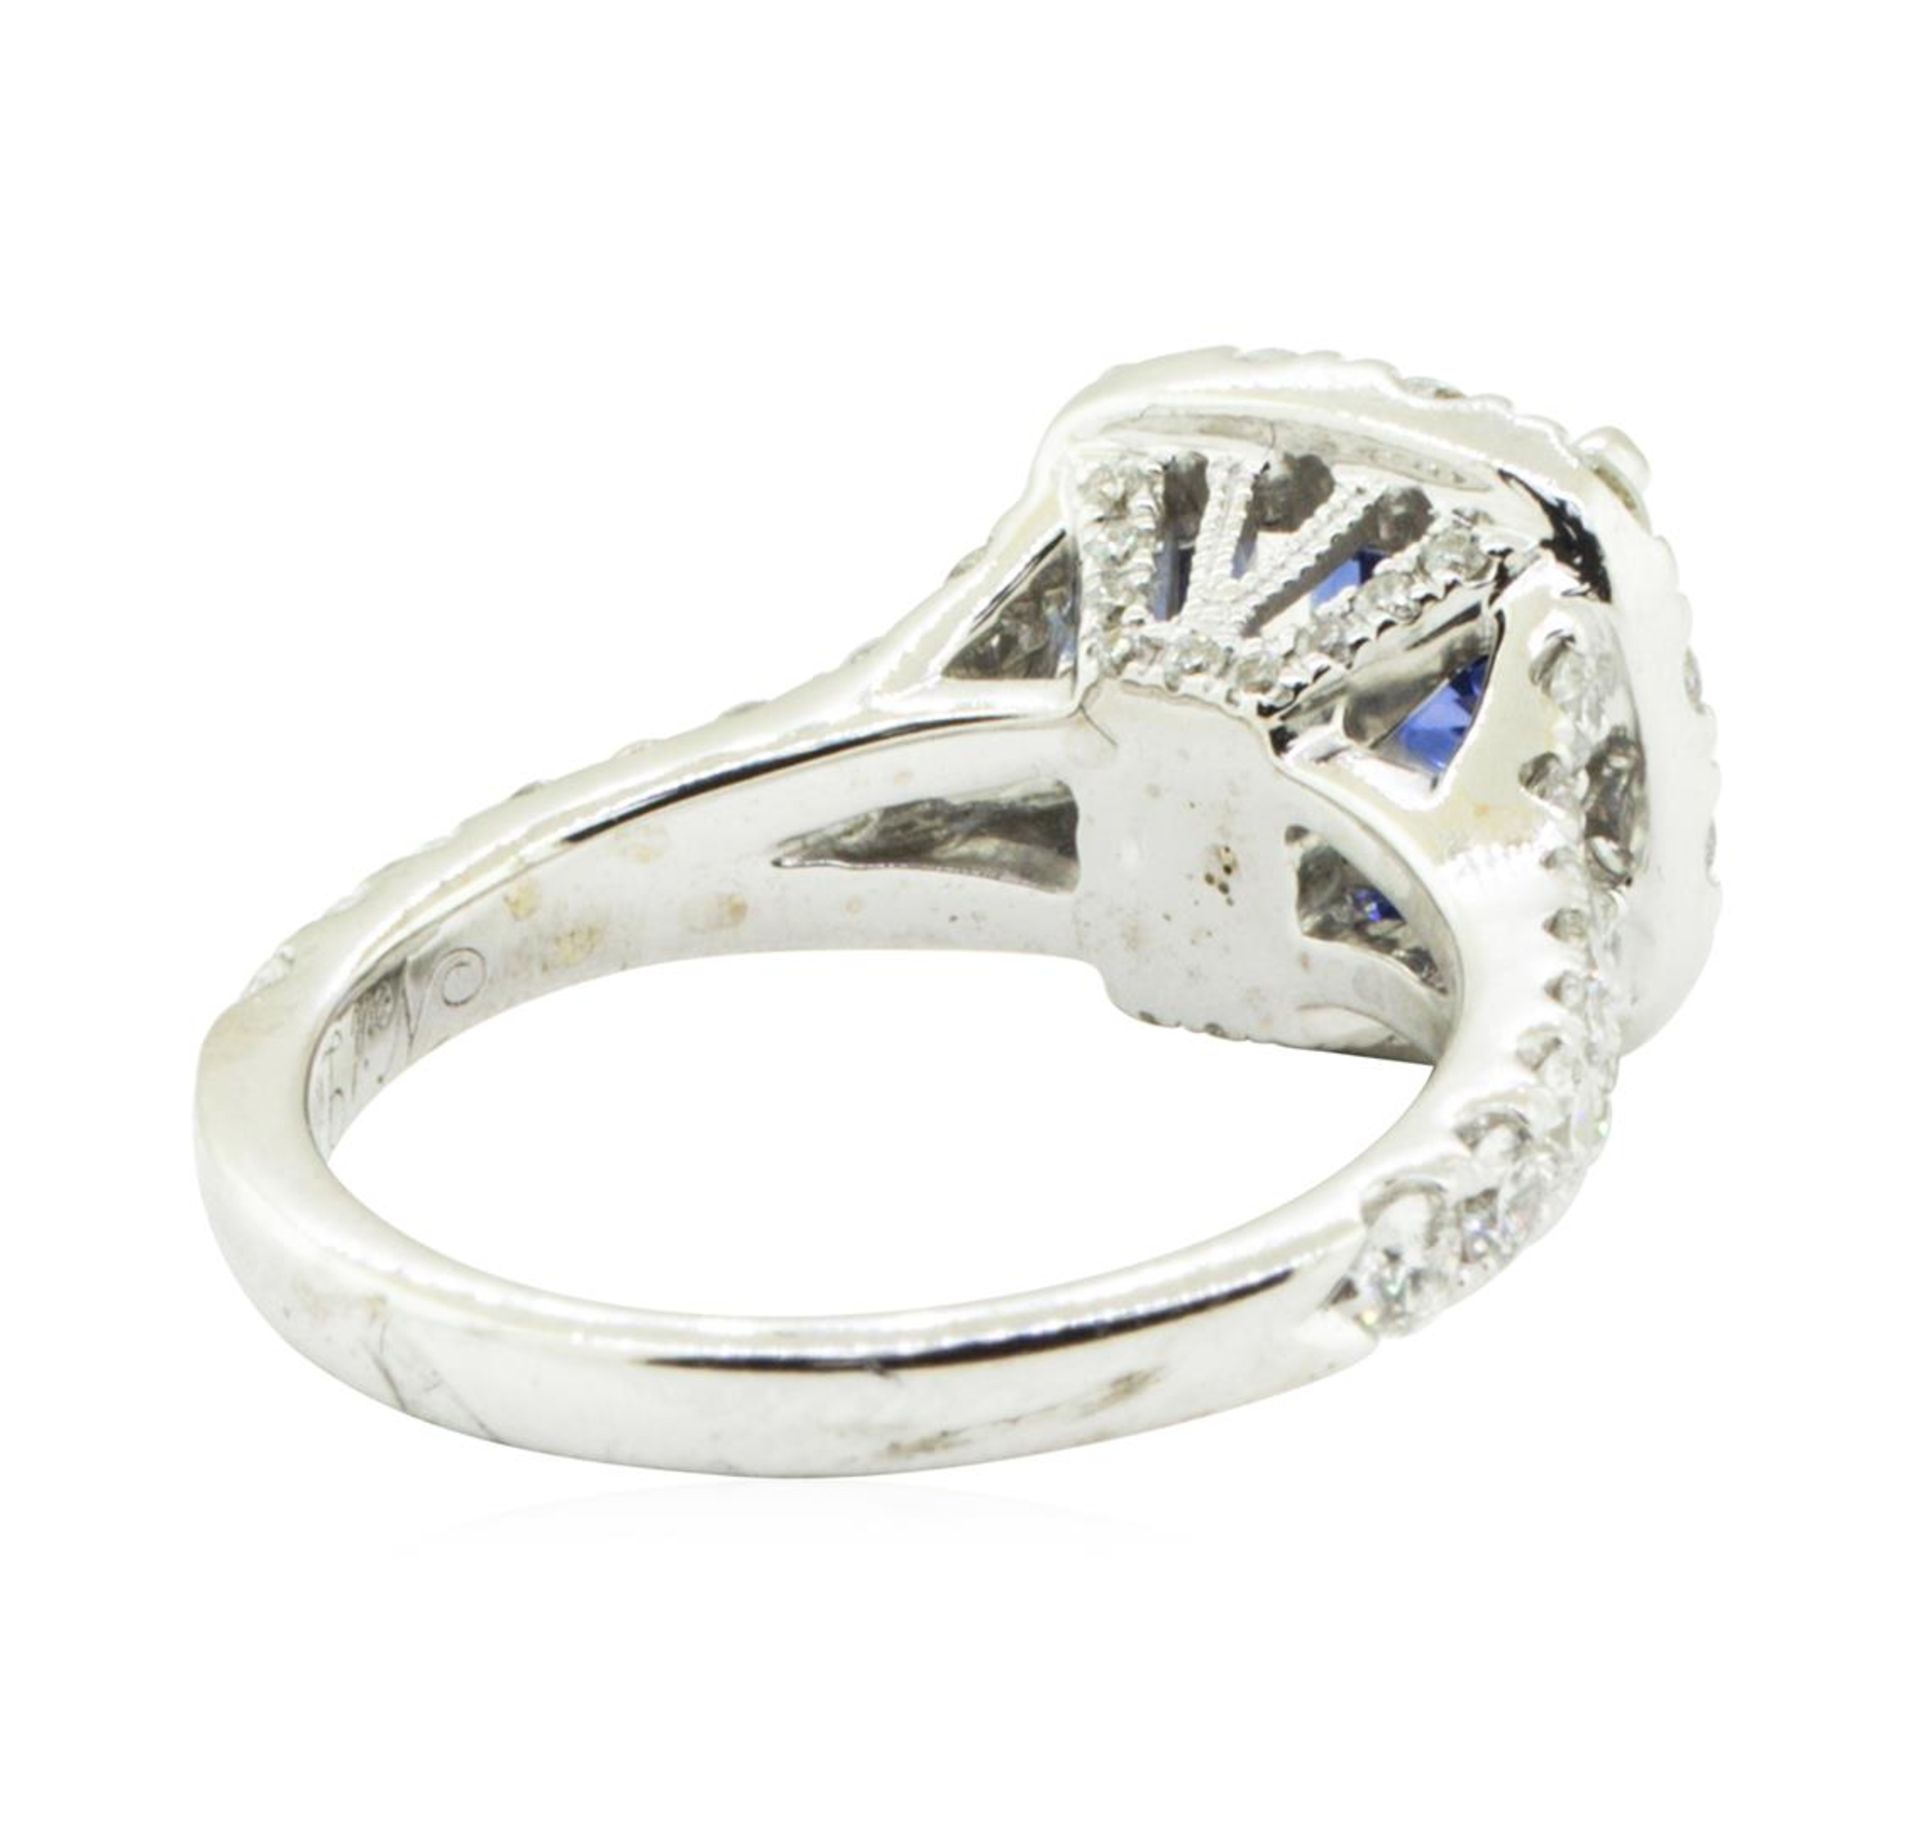 2.47 ctw Round Brilliant Blue Sapphire And Diamond Ring - 14KT White Gold - Image 3 of 5